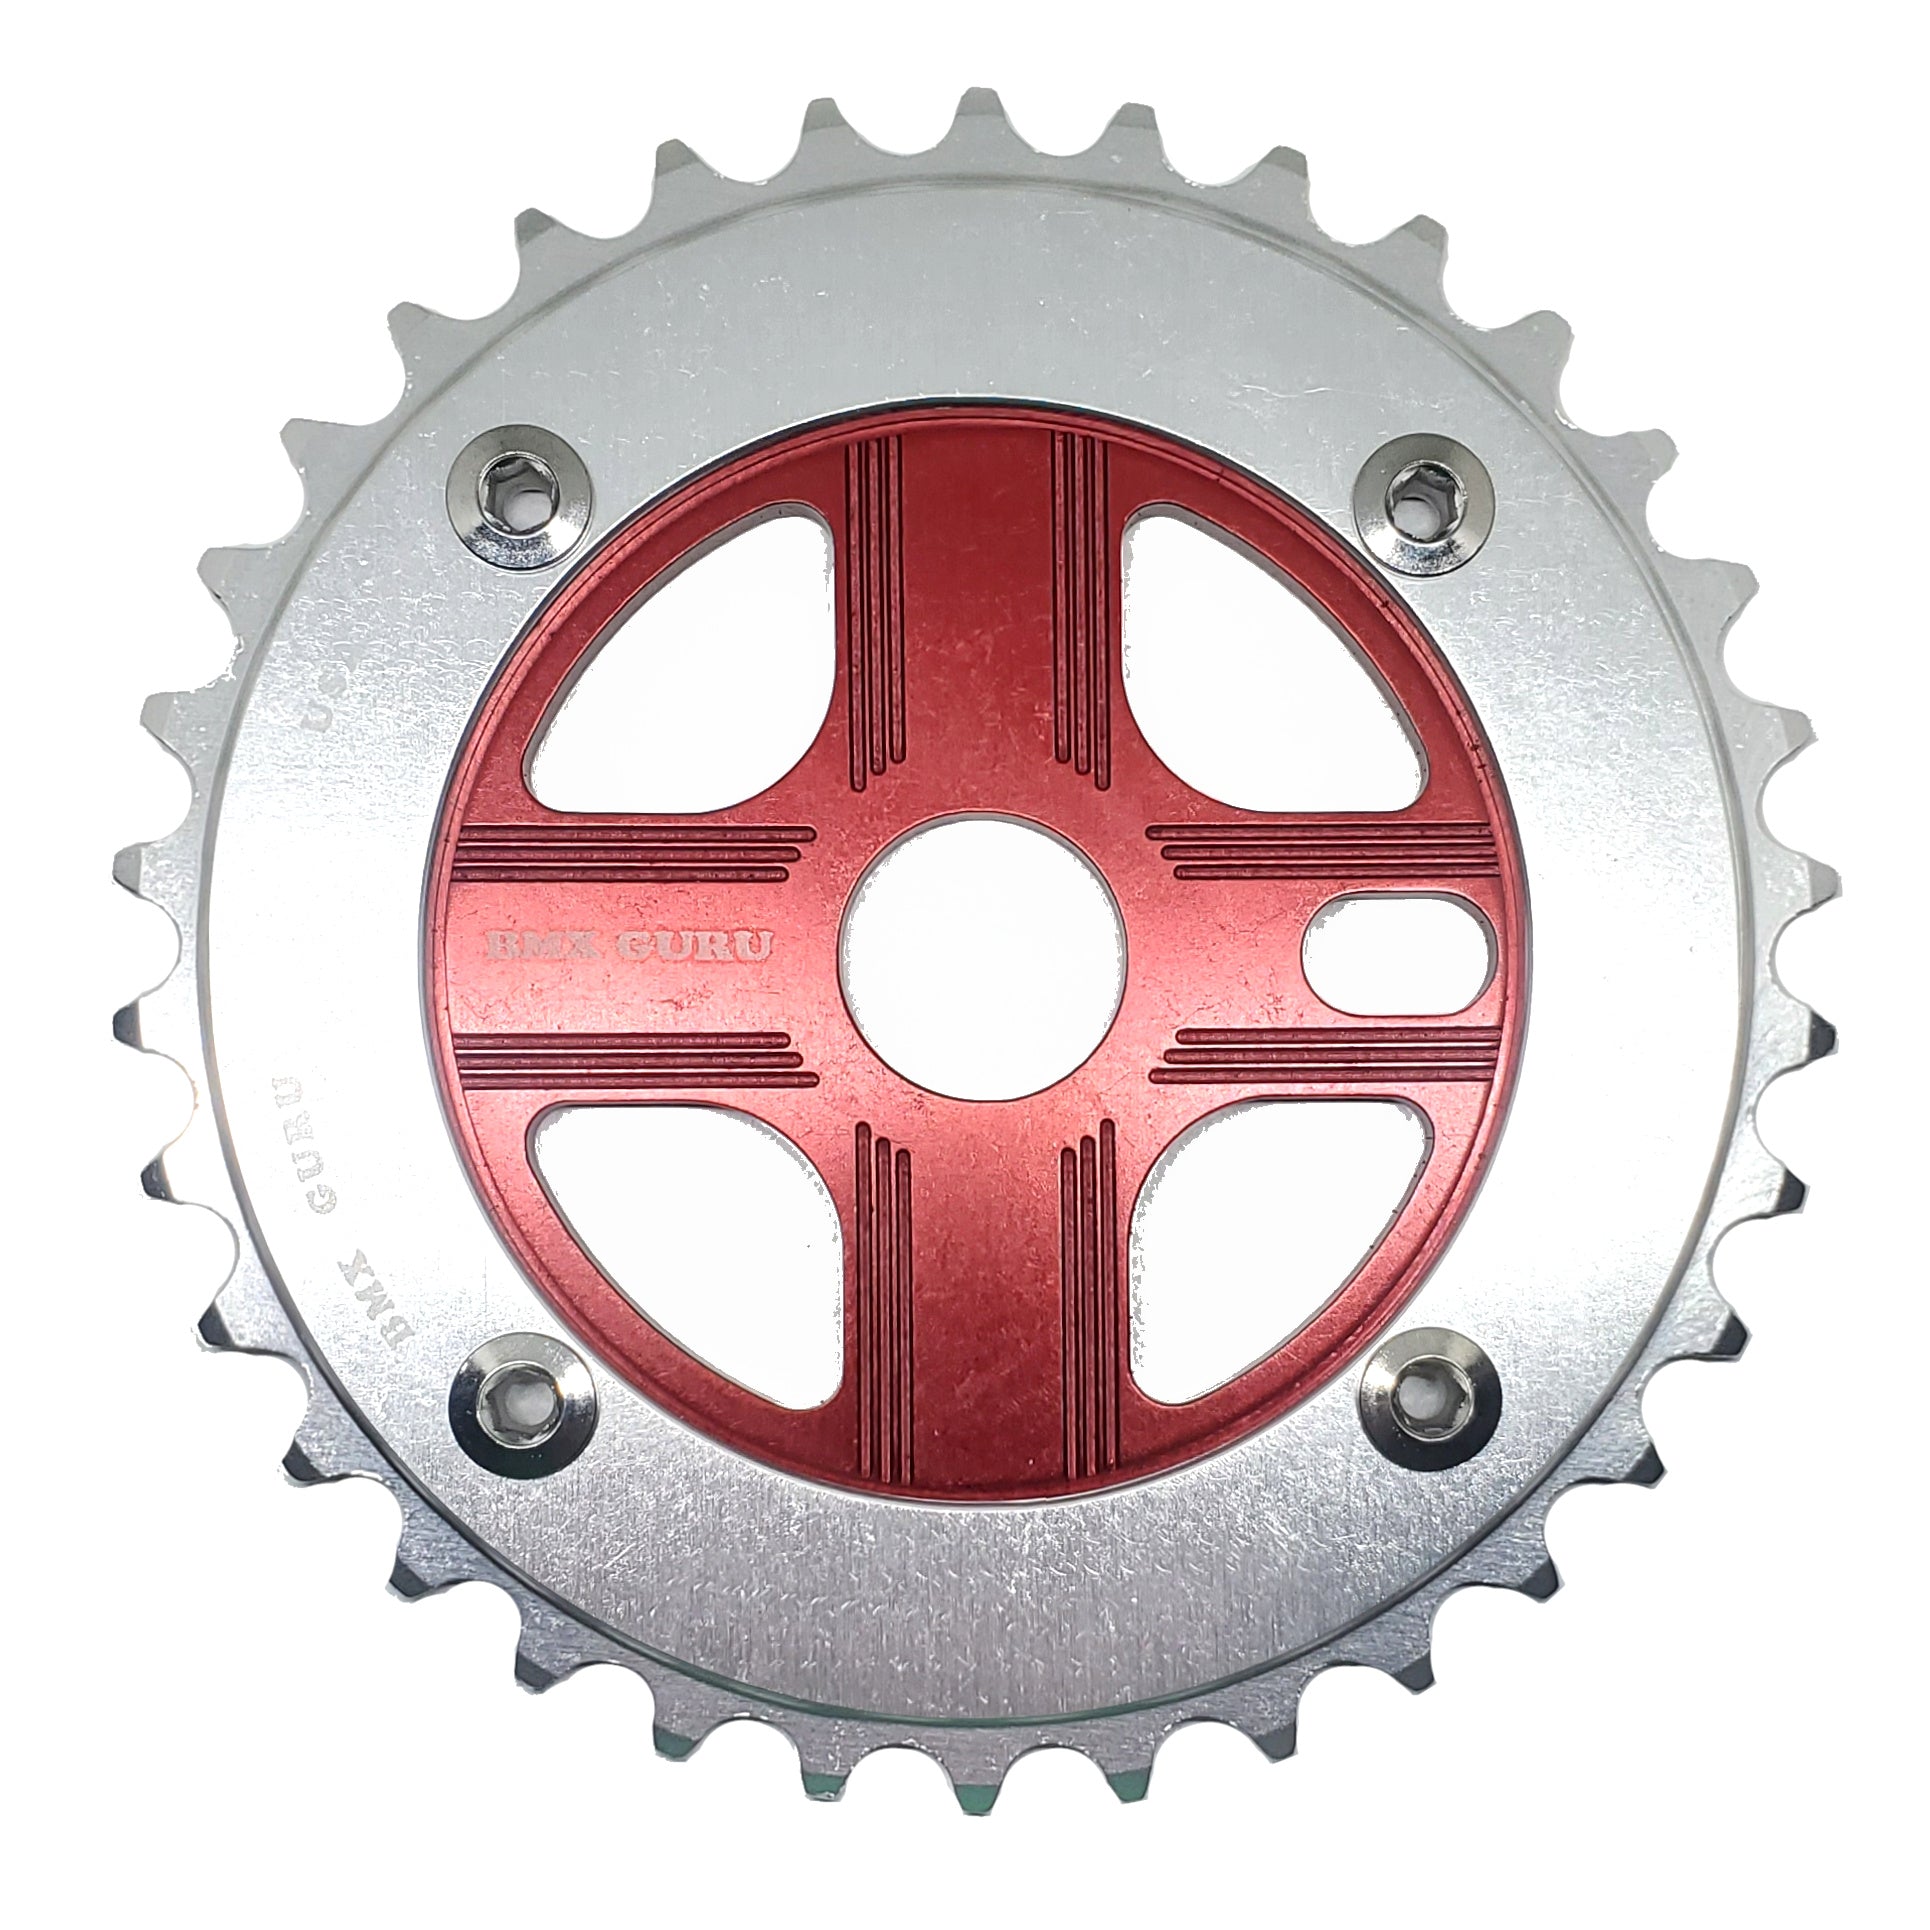 BMXGuru 34T Aluminum Spider & 4-bolt Chainring Combo - Silver over Red - USA Made